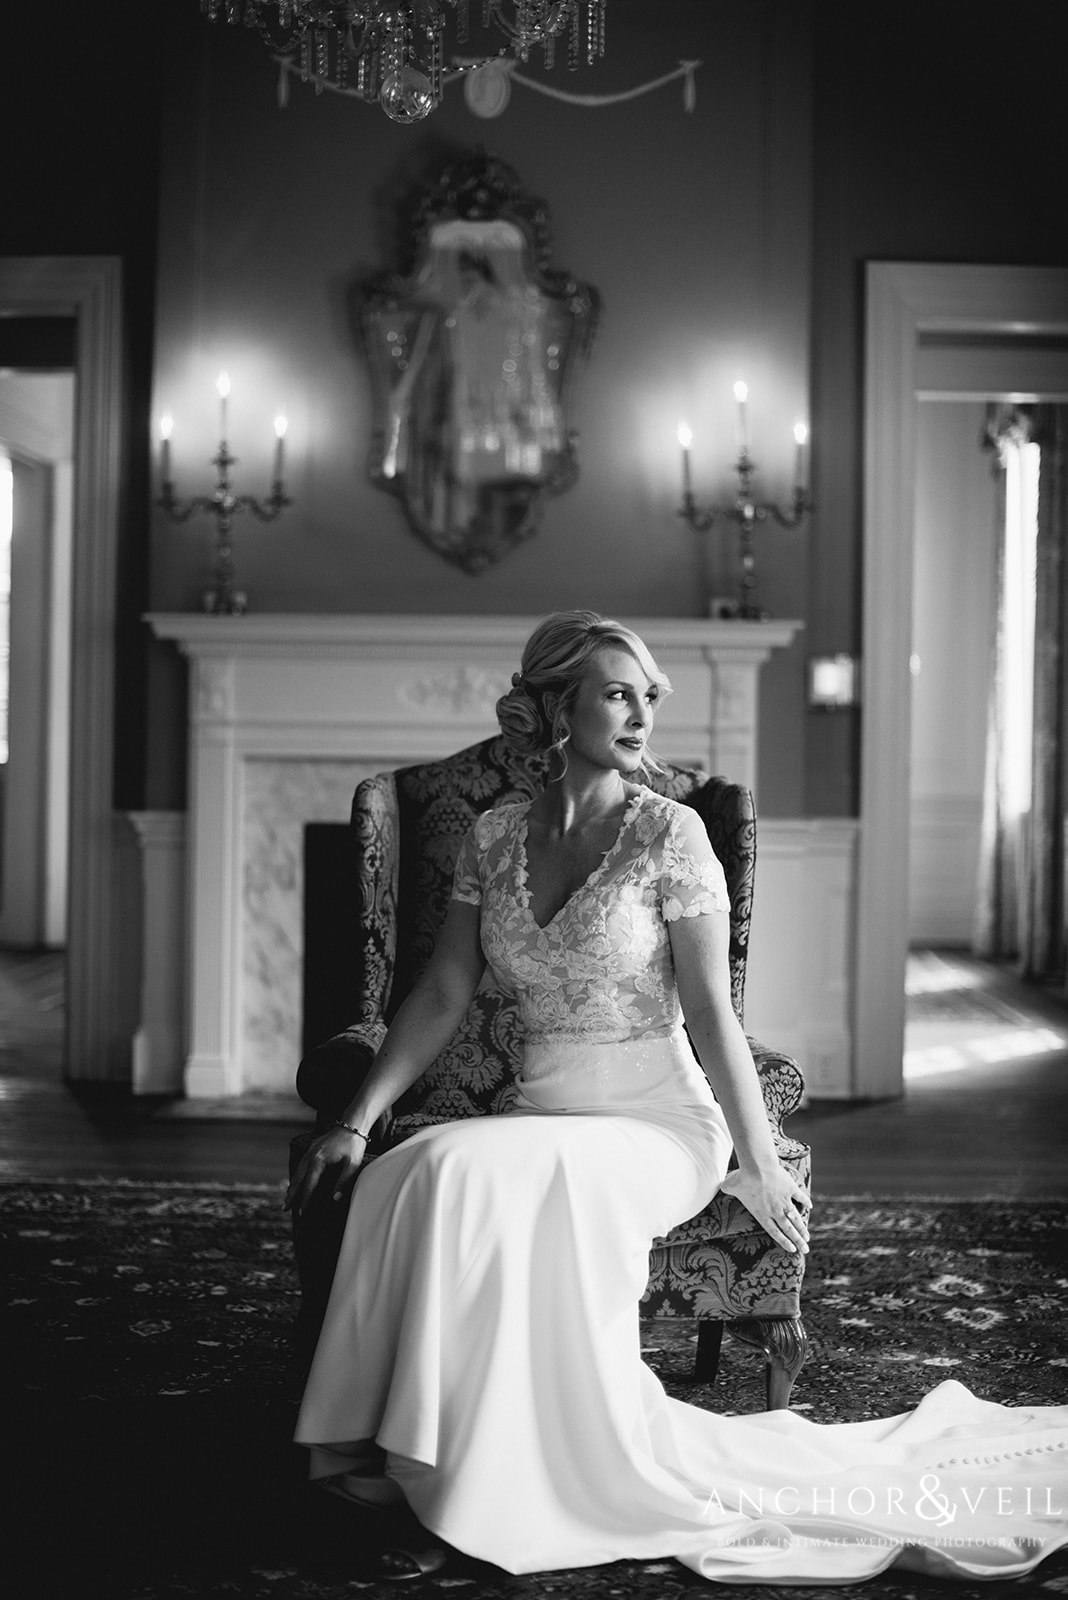 The bride sitting in her dress at the Lowndes Grove Plantation Wedding